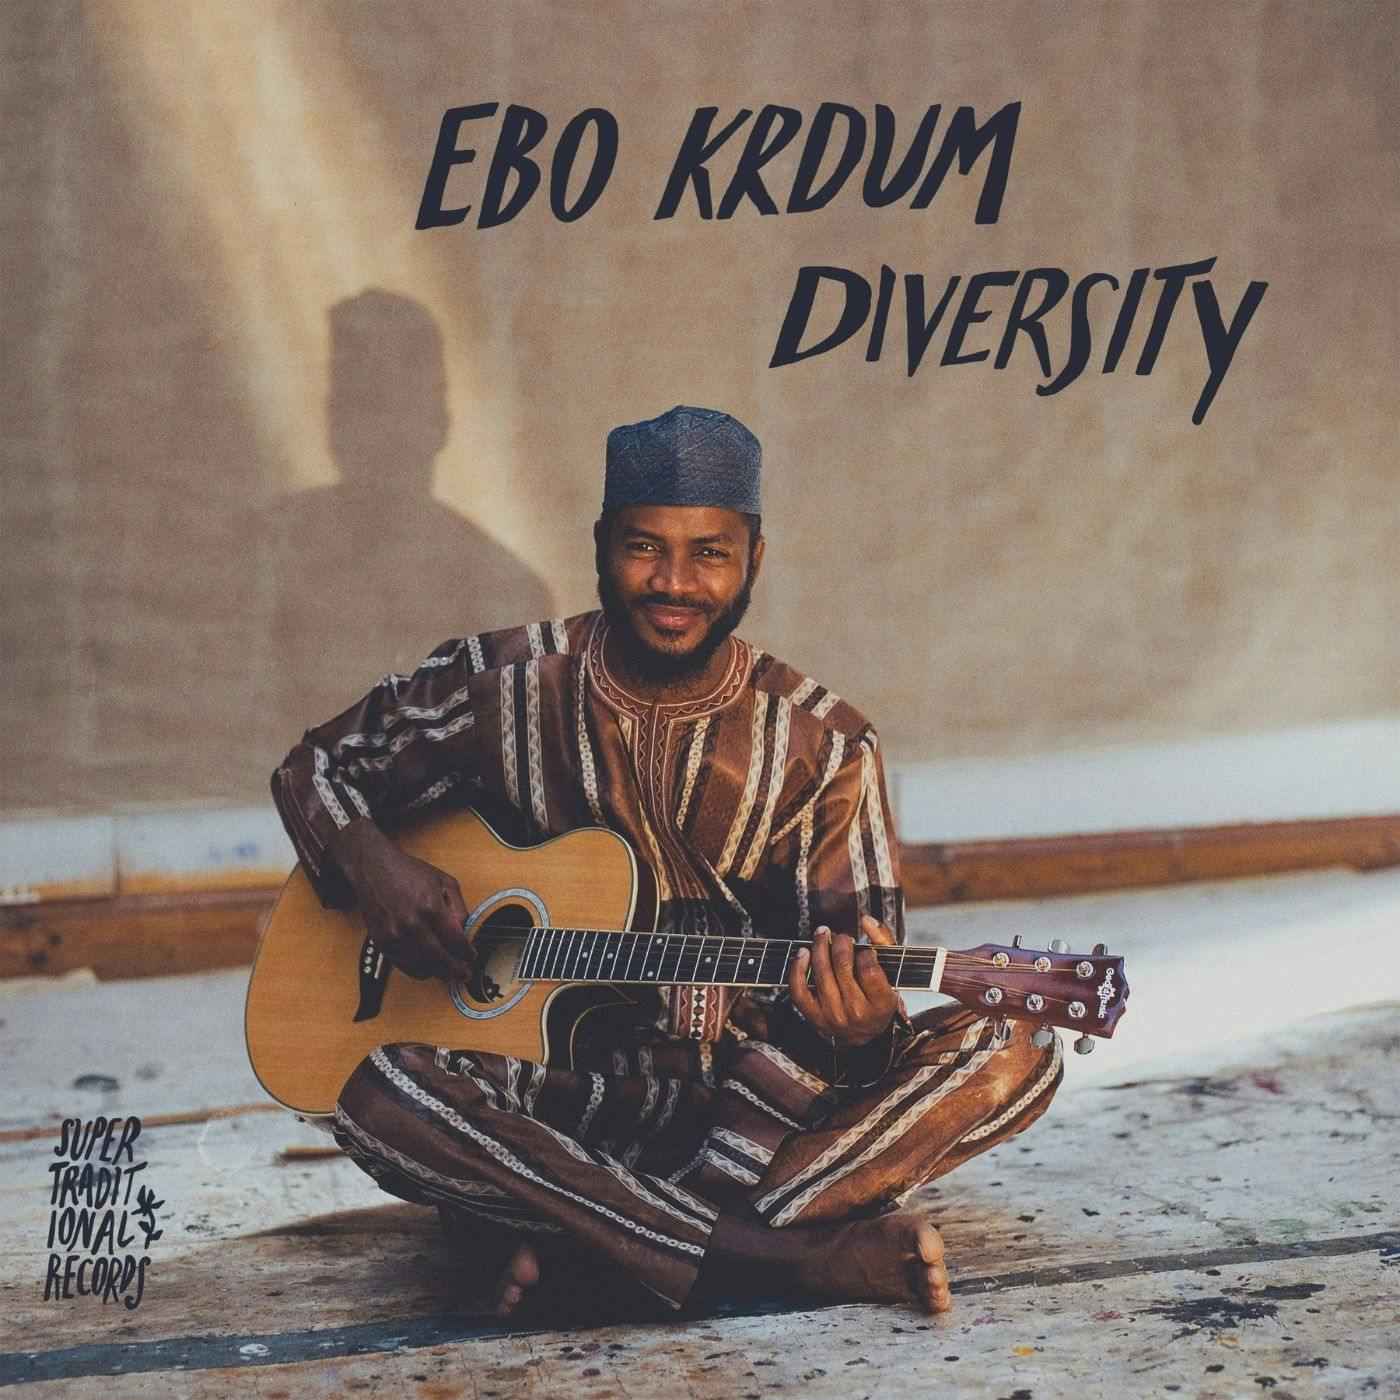 This is Ebo album Diversity image. Photo by: Olof Grind and all cover designs by Karin Linderoth